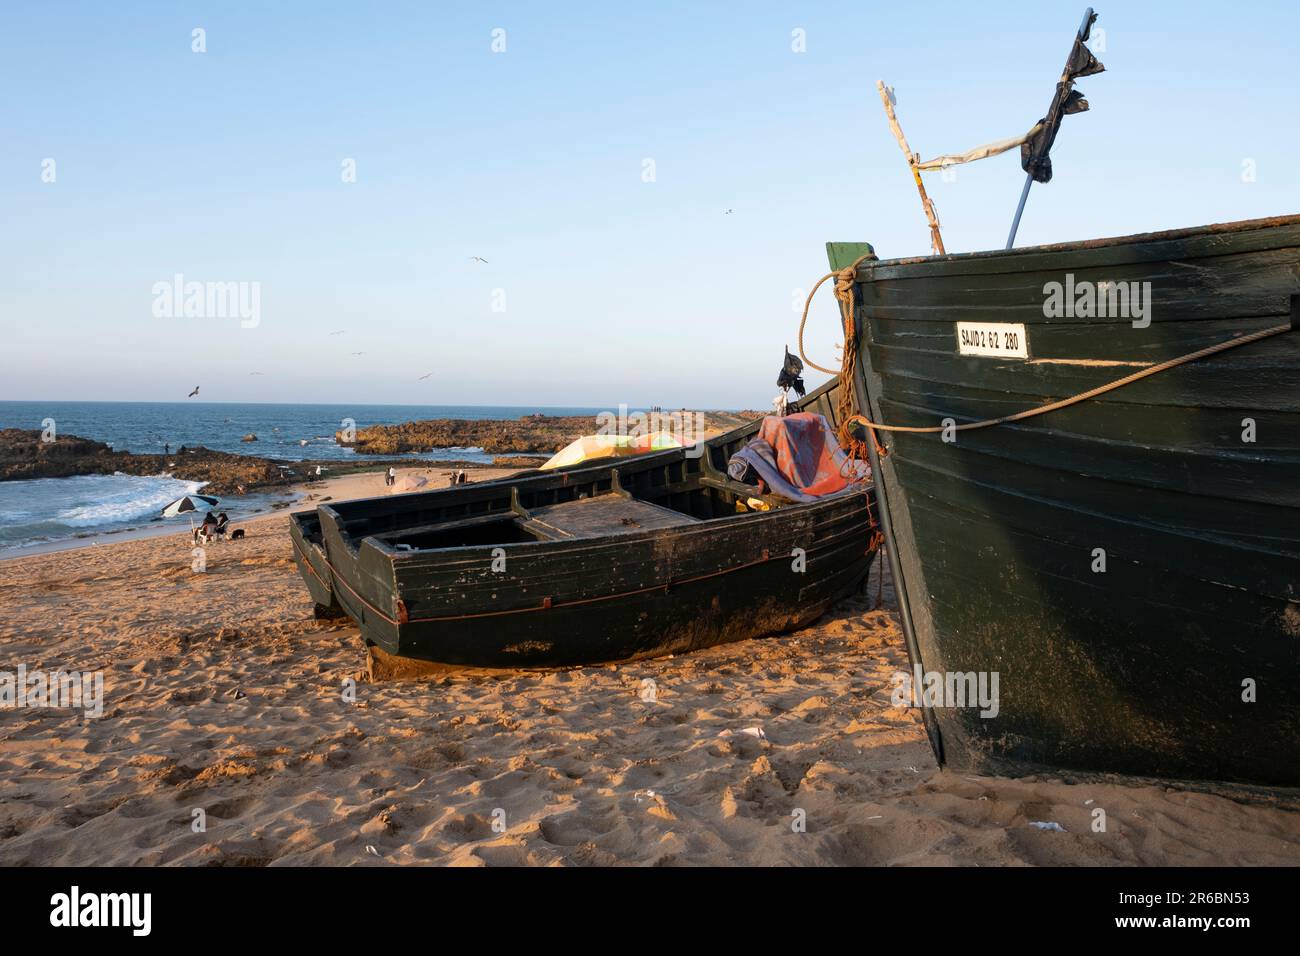 Fishing boats on the sandy beach at Oualidia in Morocco in the warm orange afternoon light Stock Photo